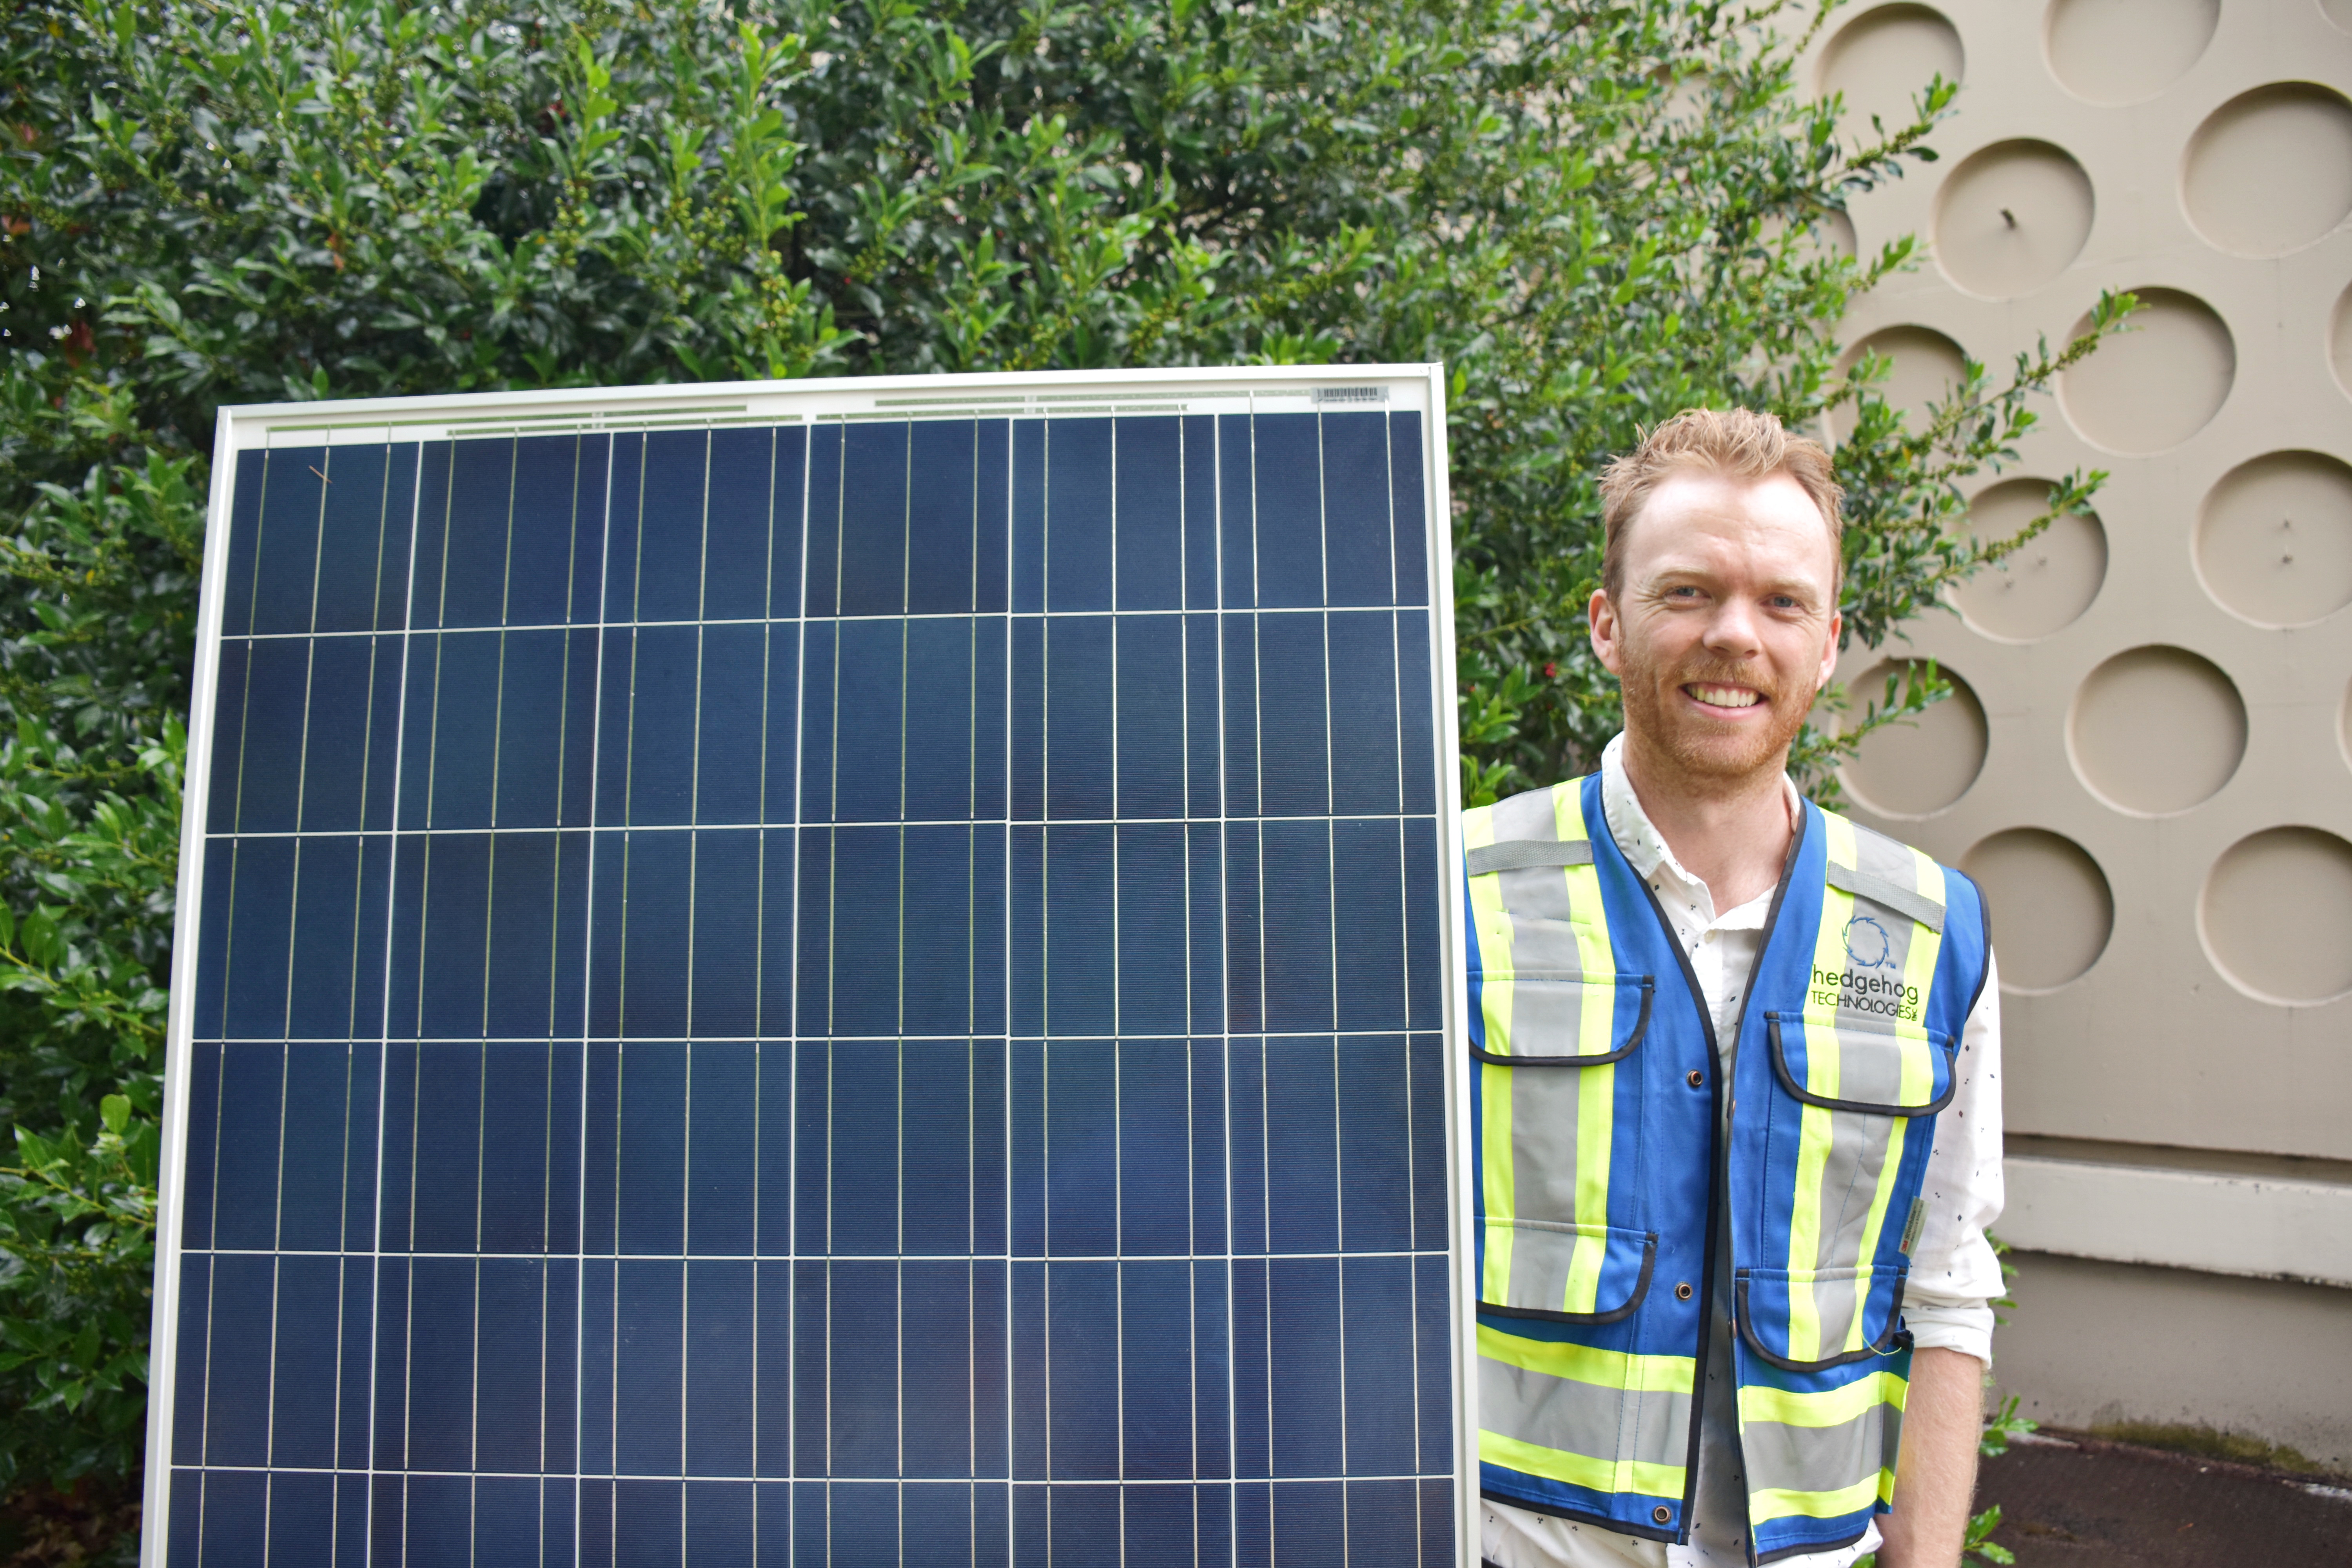 A co-op engineer holding a solar panel